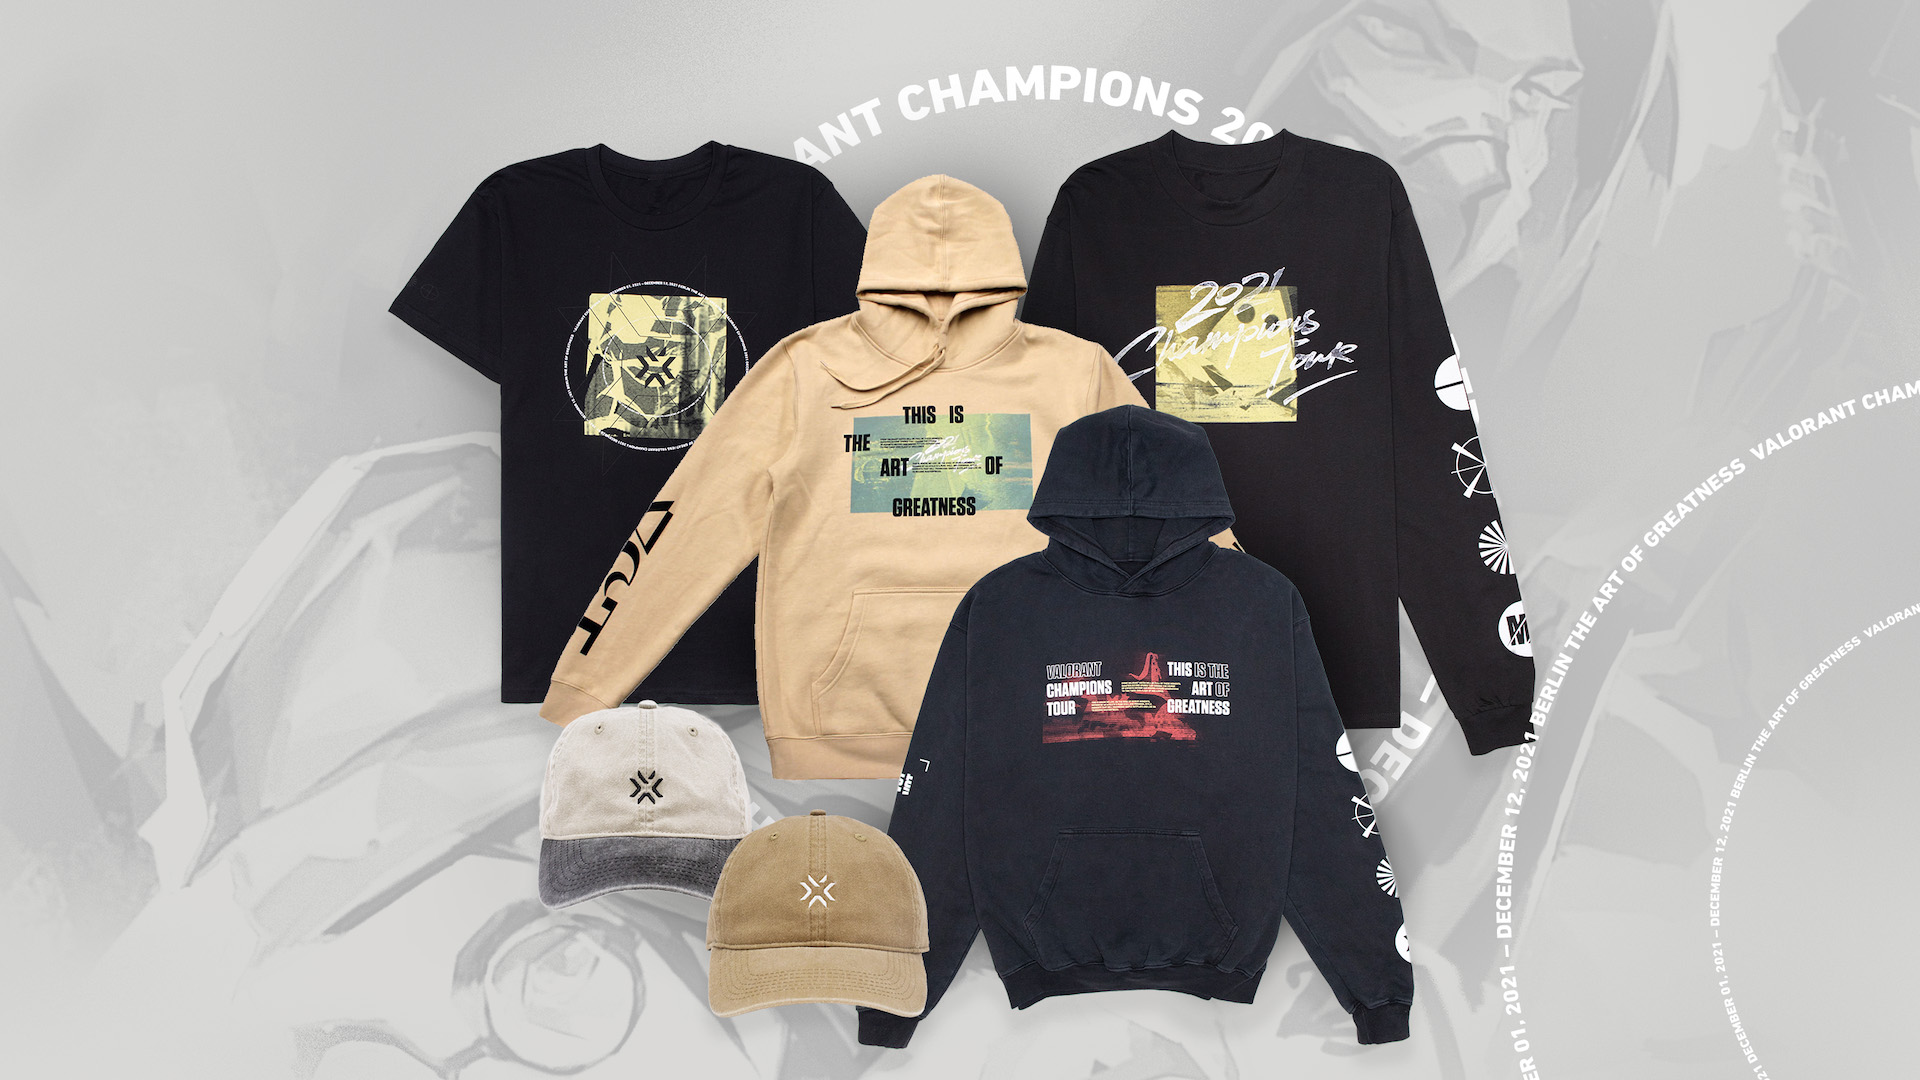 Introducing the Champions 2021 Apparel Collection